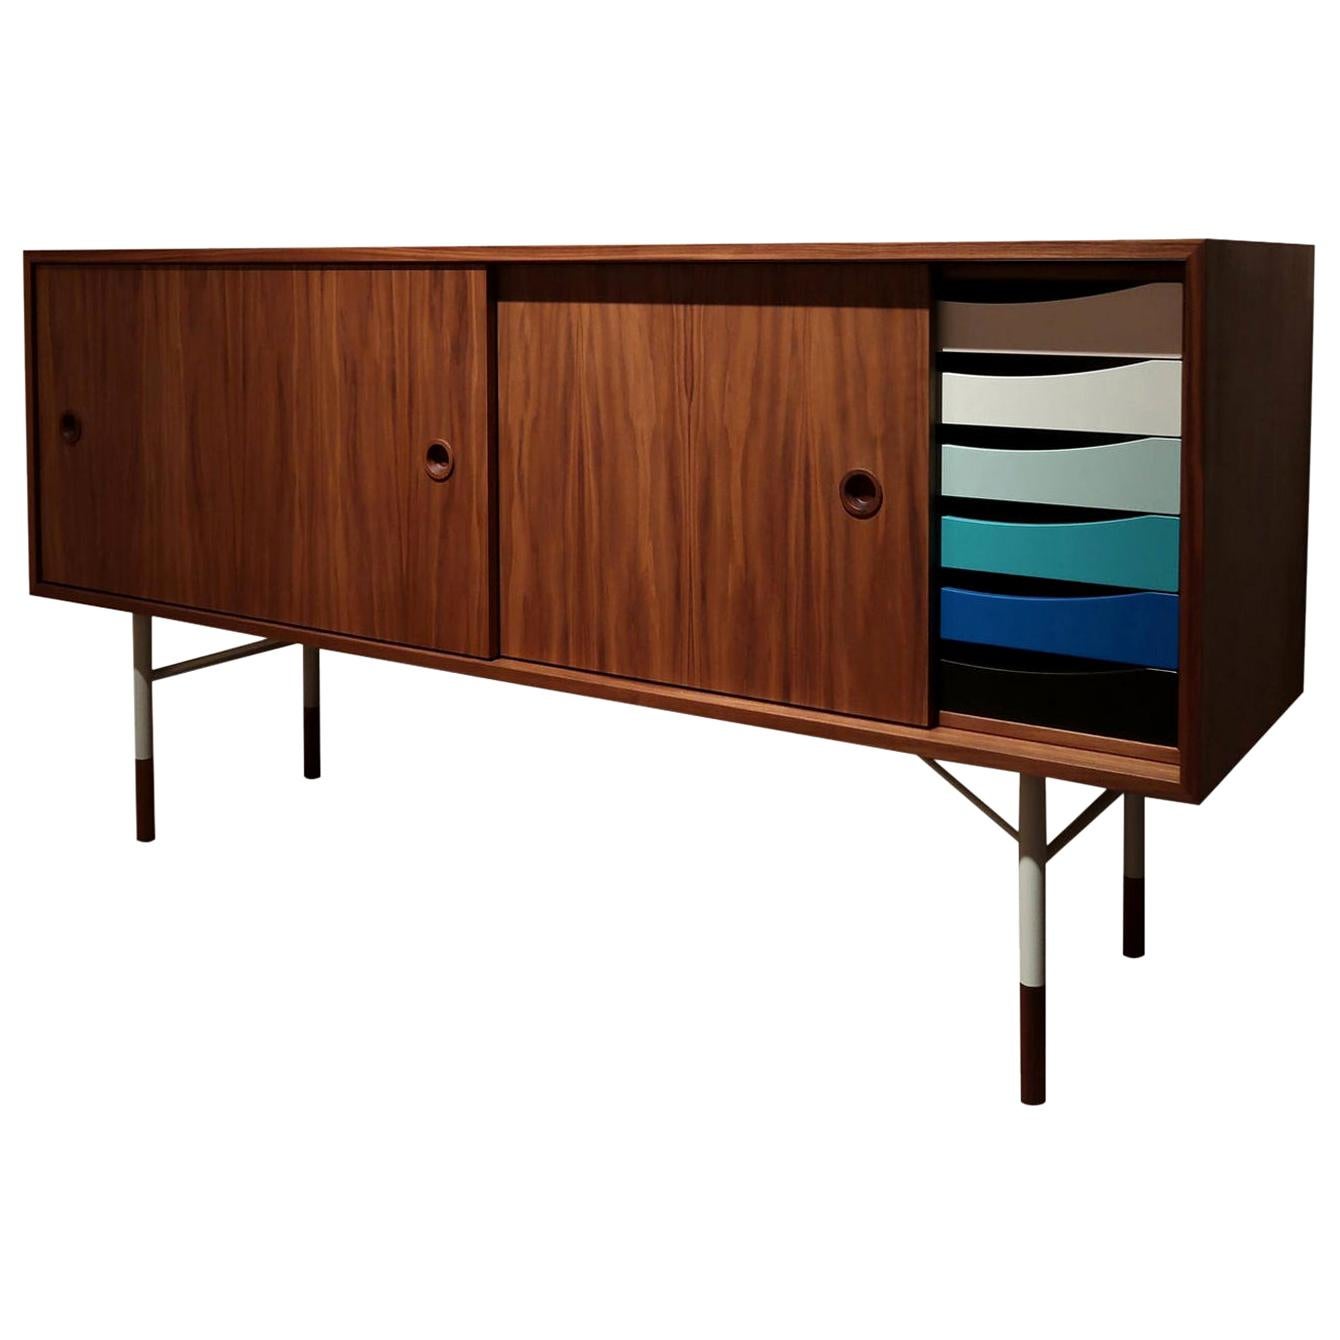 Finn Juhl Sideboard in Wood and whit Unit Tray in Cold Colors